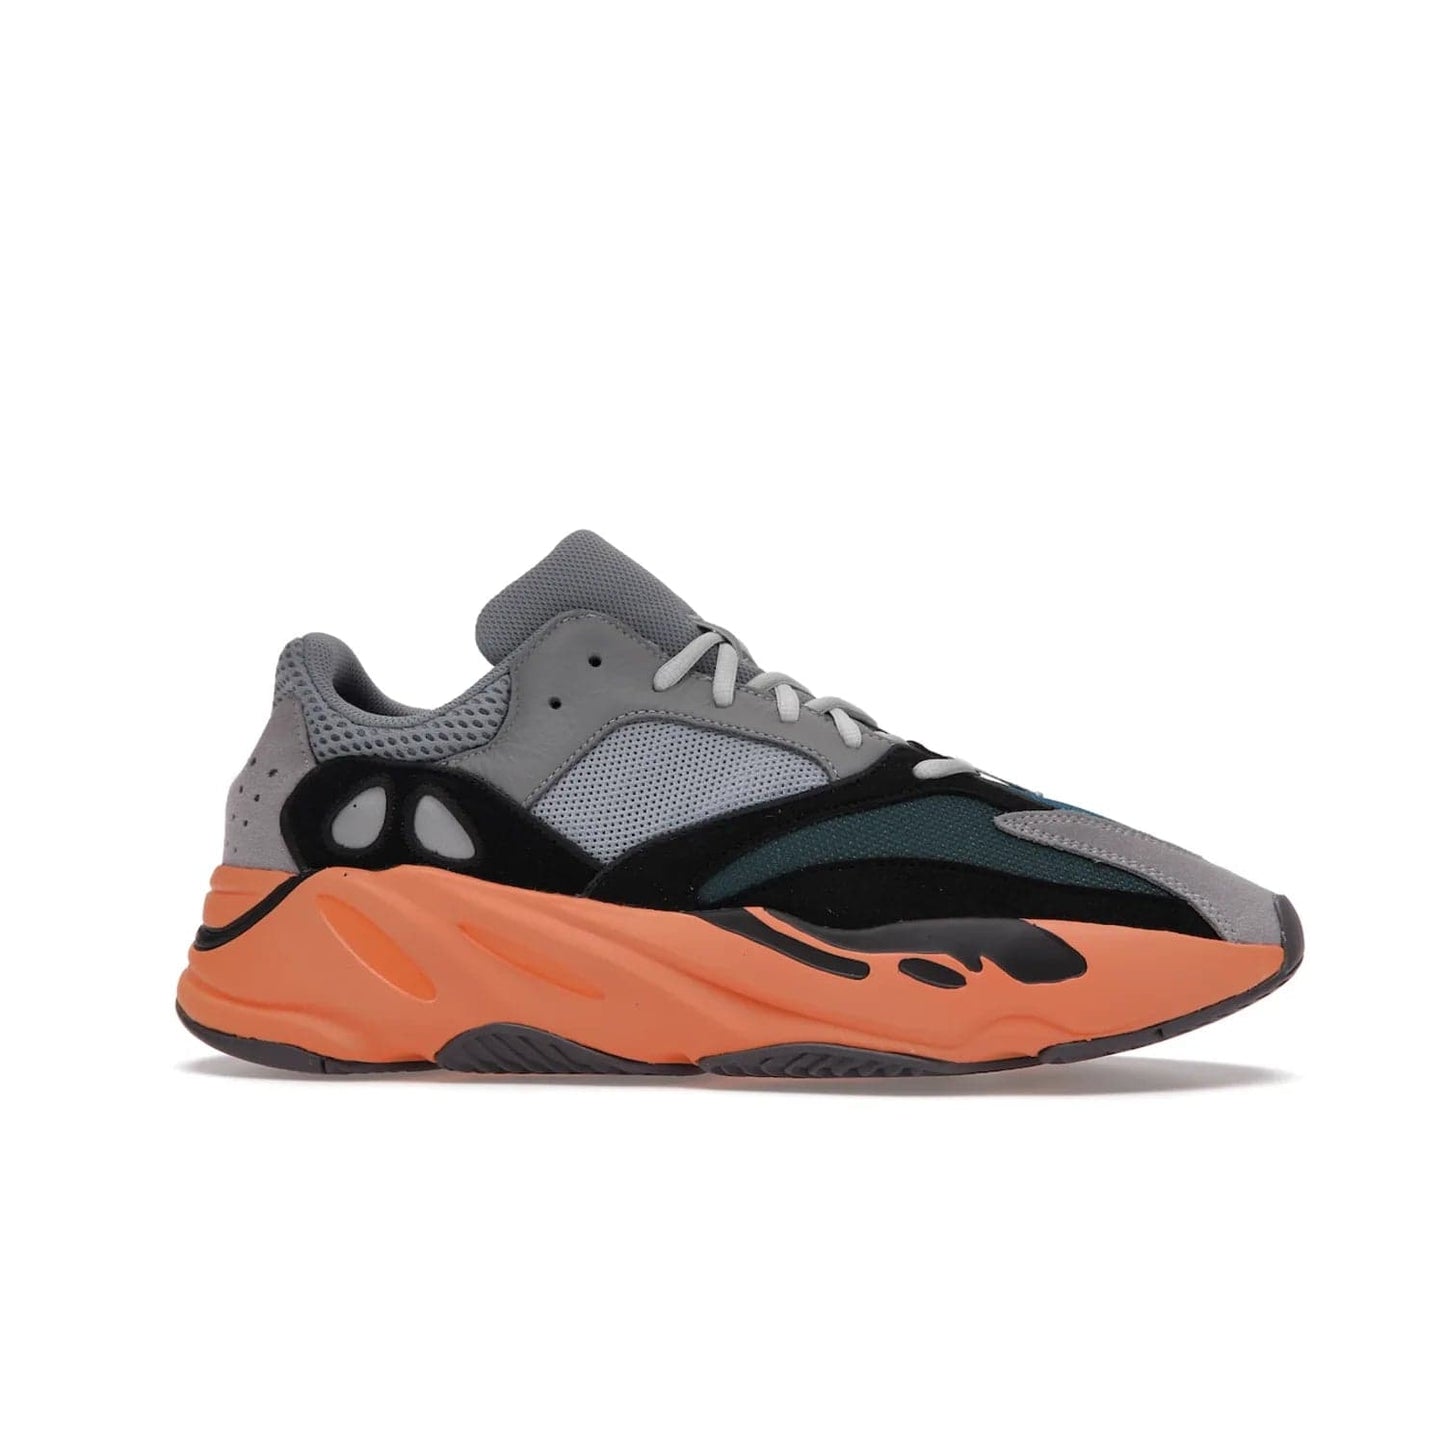 adidas Yeezy Boost 700 Wash Orange - Image 2 - Only at www.BallersClubKickz.com - Introducing the adidas Yeezy Boost 700 Wash Orange. Unique grey leather, suede, mesh upper and teal panels with a chunky Wash Orange Boost midsole. Release October 2021, make a statement today!